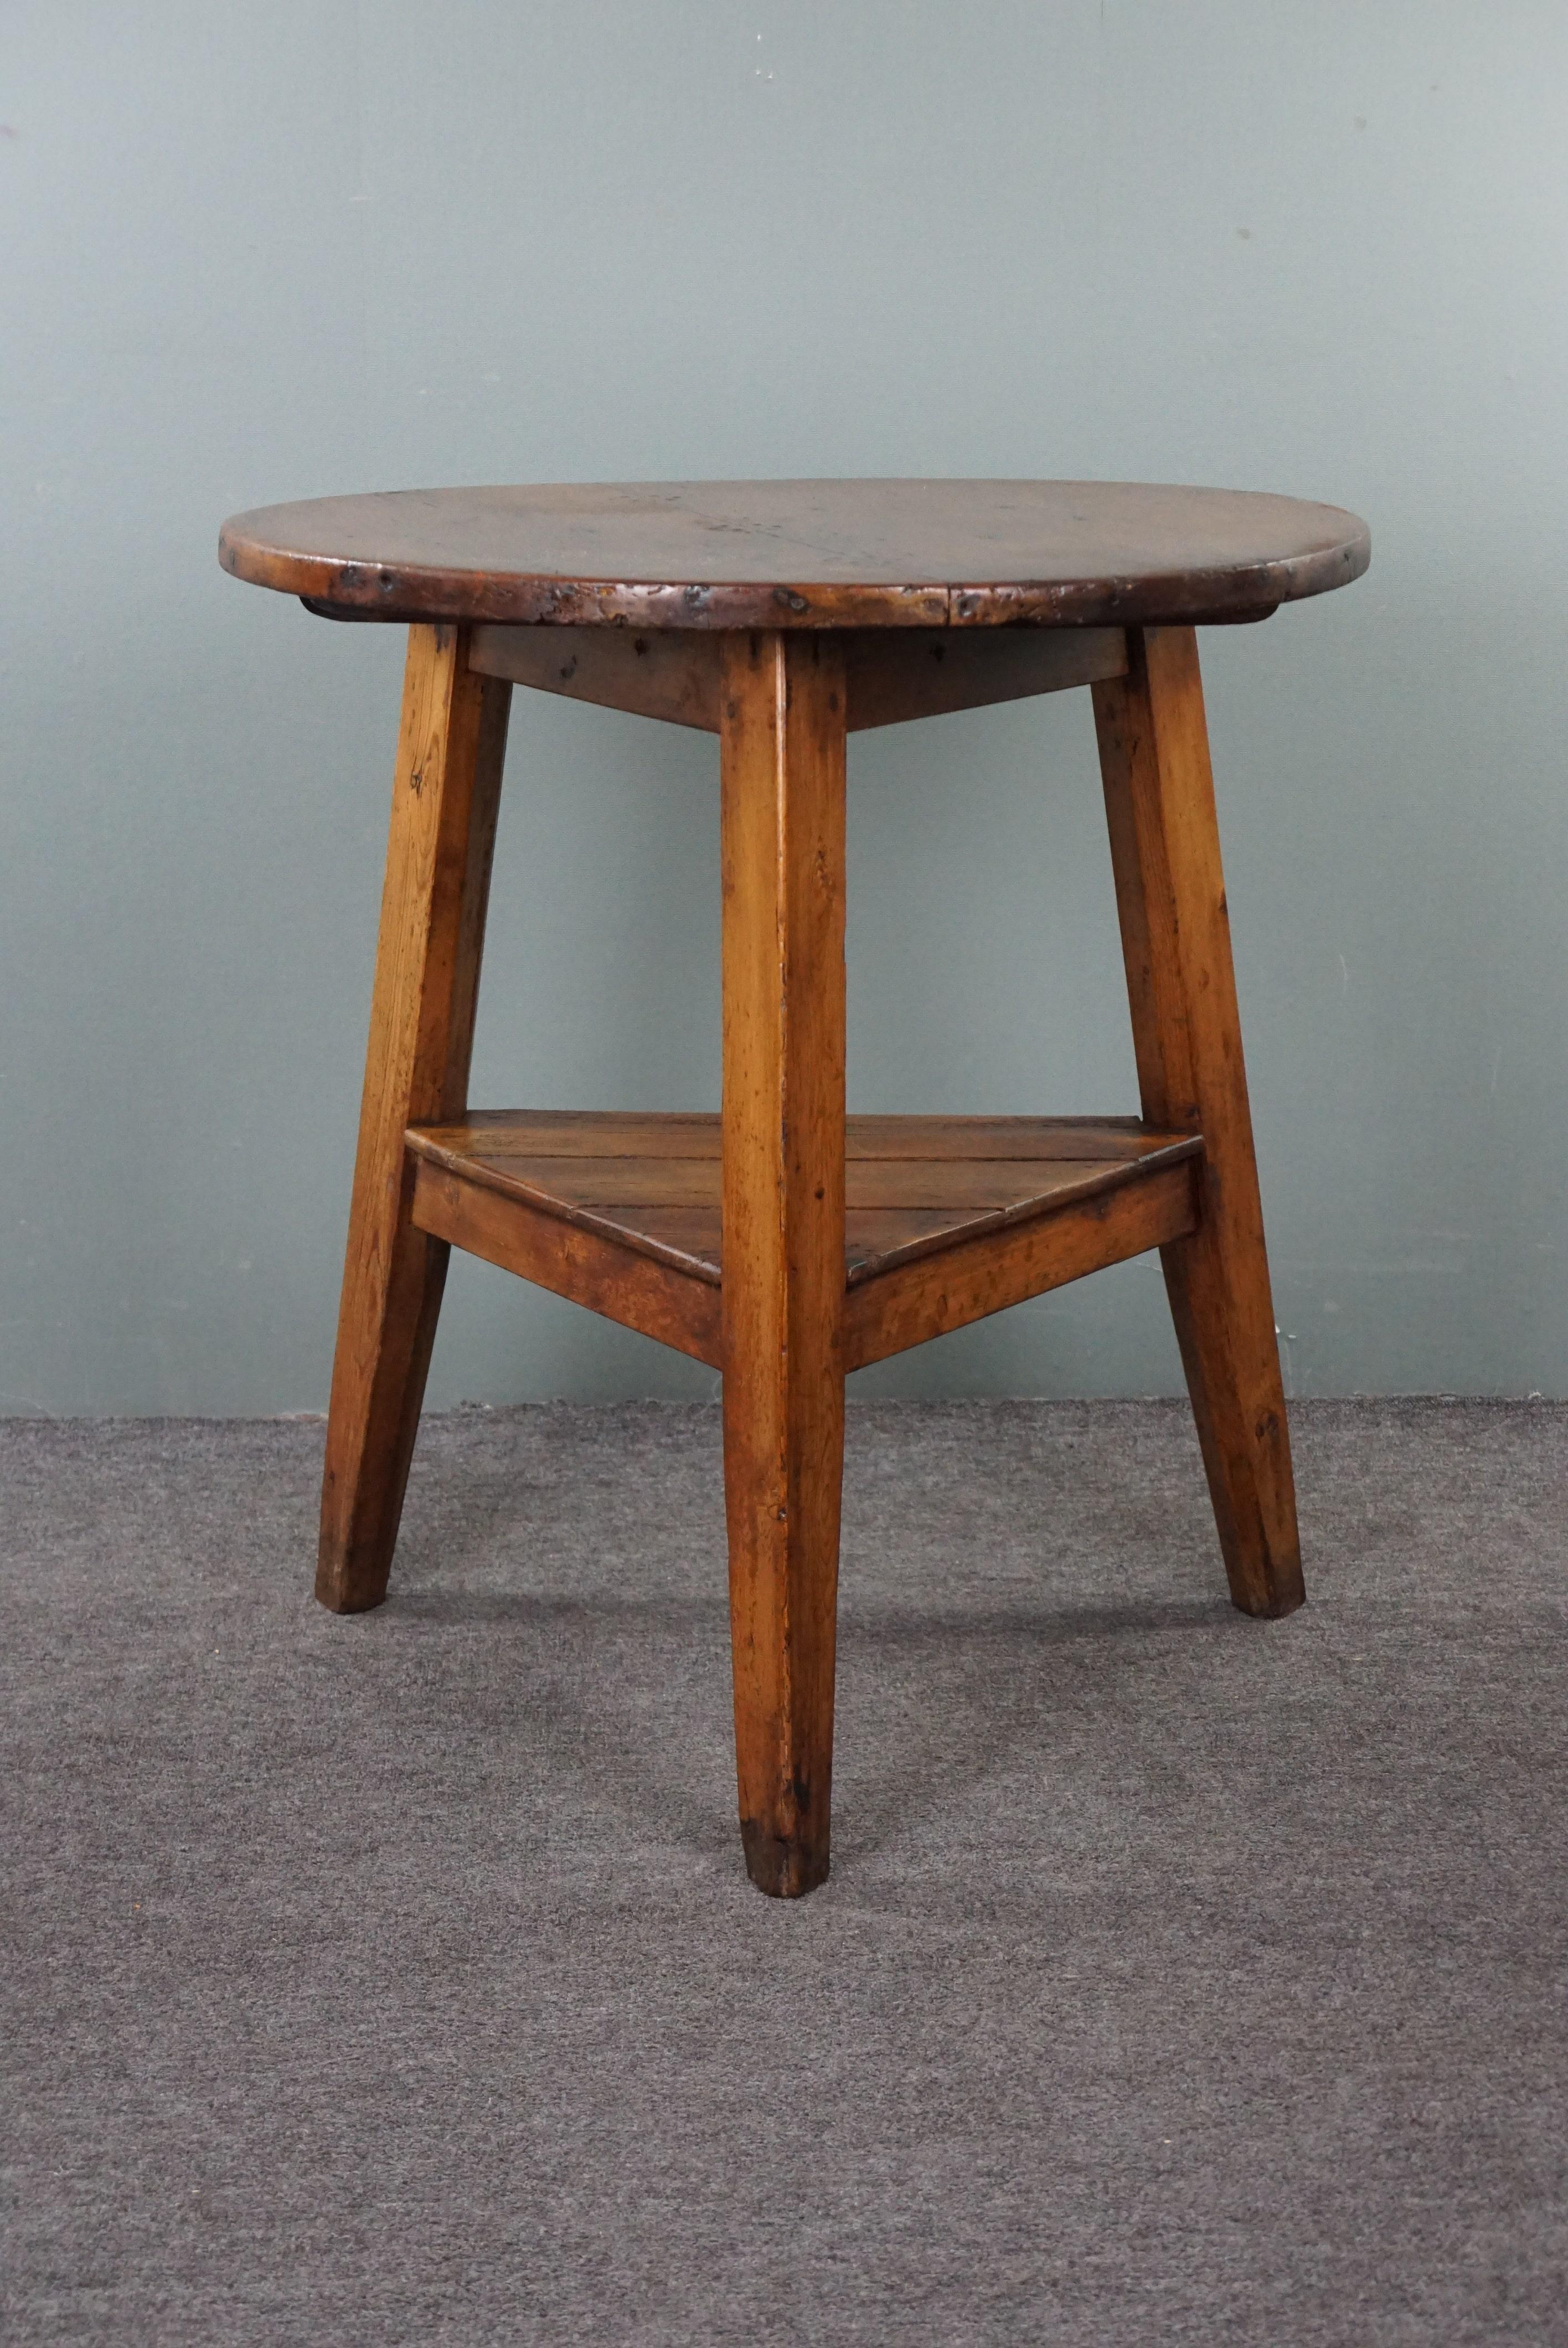 Offered is this beautiful tall, honey-colored, early 19th-century English pinewood cricket table with original nails and oxidation. We ourselves are big fans of cricket tables. Not only for their unique and irresistible appearance but also for their